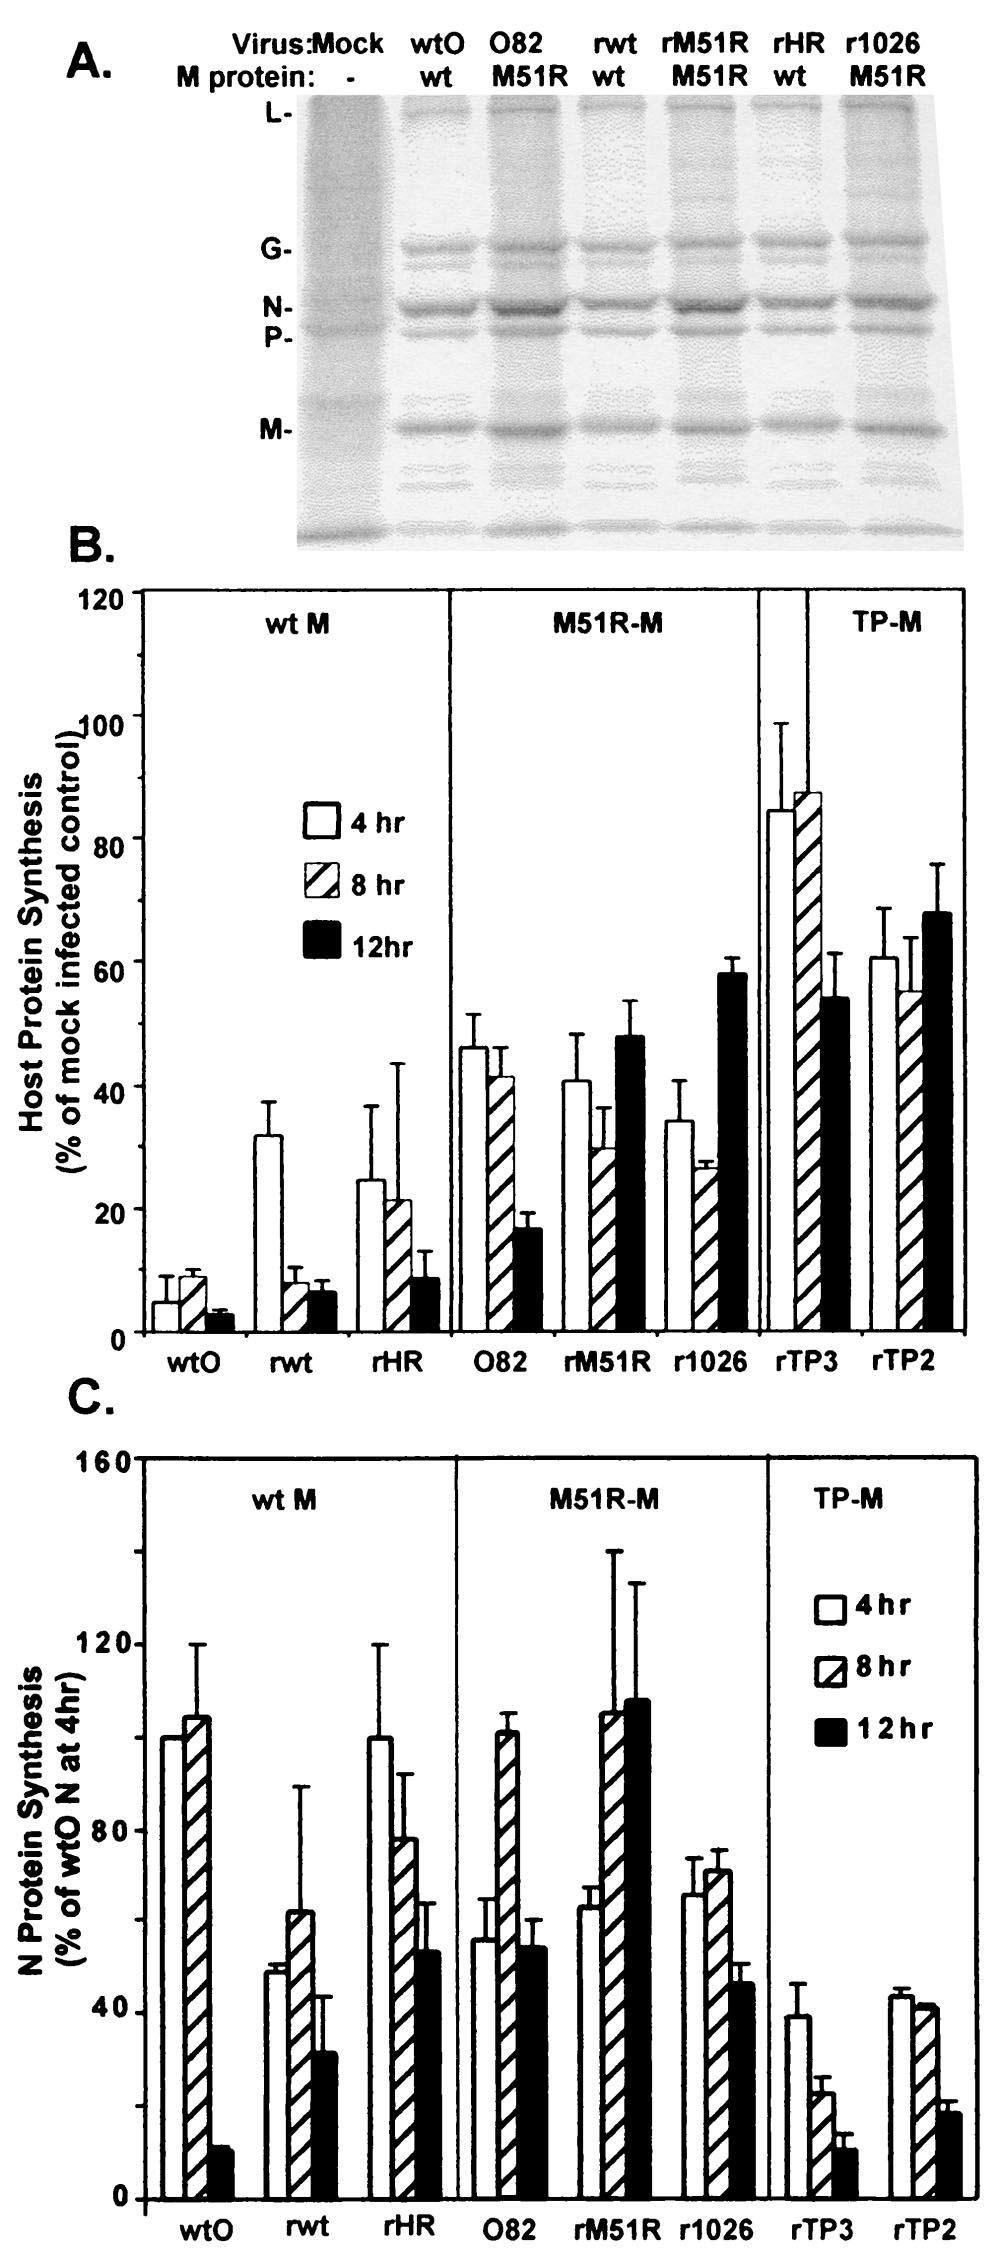 VOL. 77, 2003 INHIBITION OF INTERFERON GENE BY VSV M PROTEIN 4653 RNA synthesis over the time course at around 60 and 90% of controls, respectively.